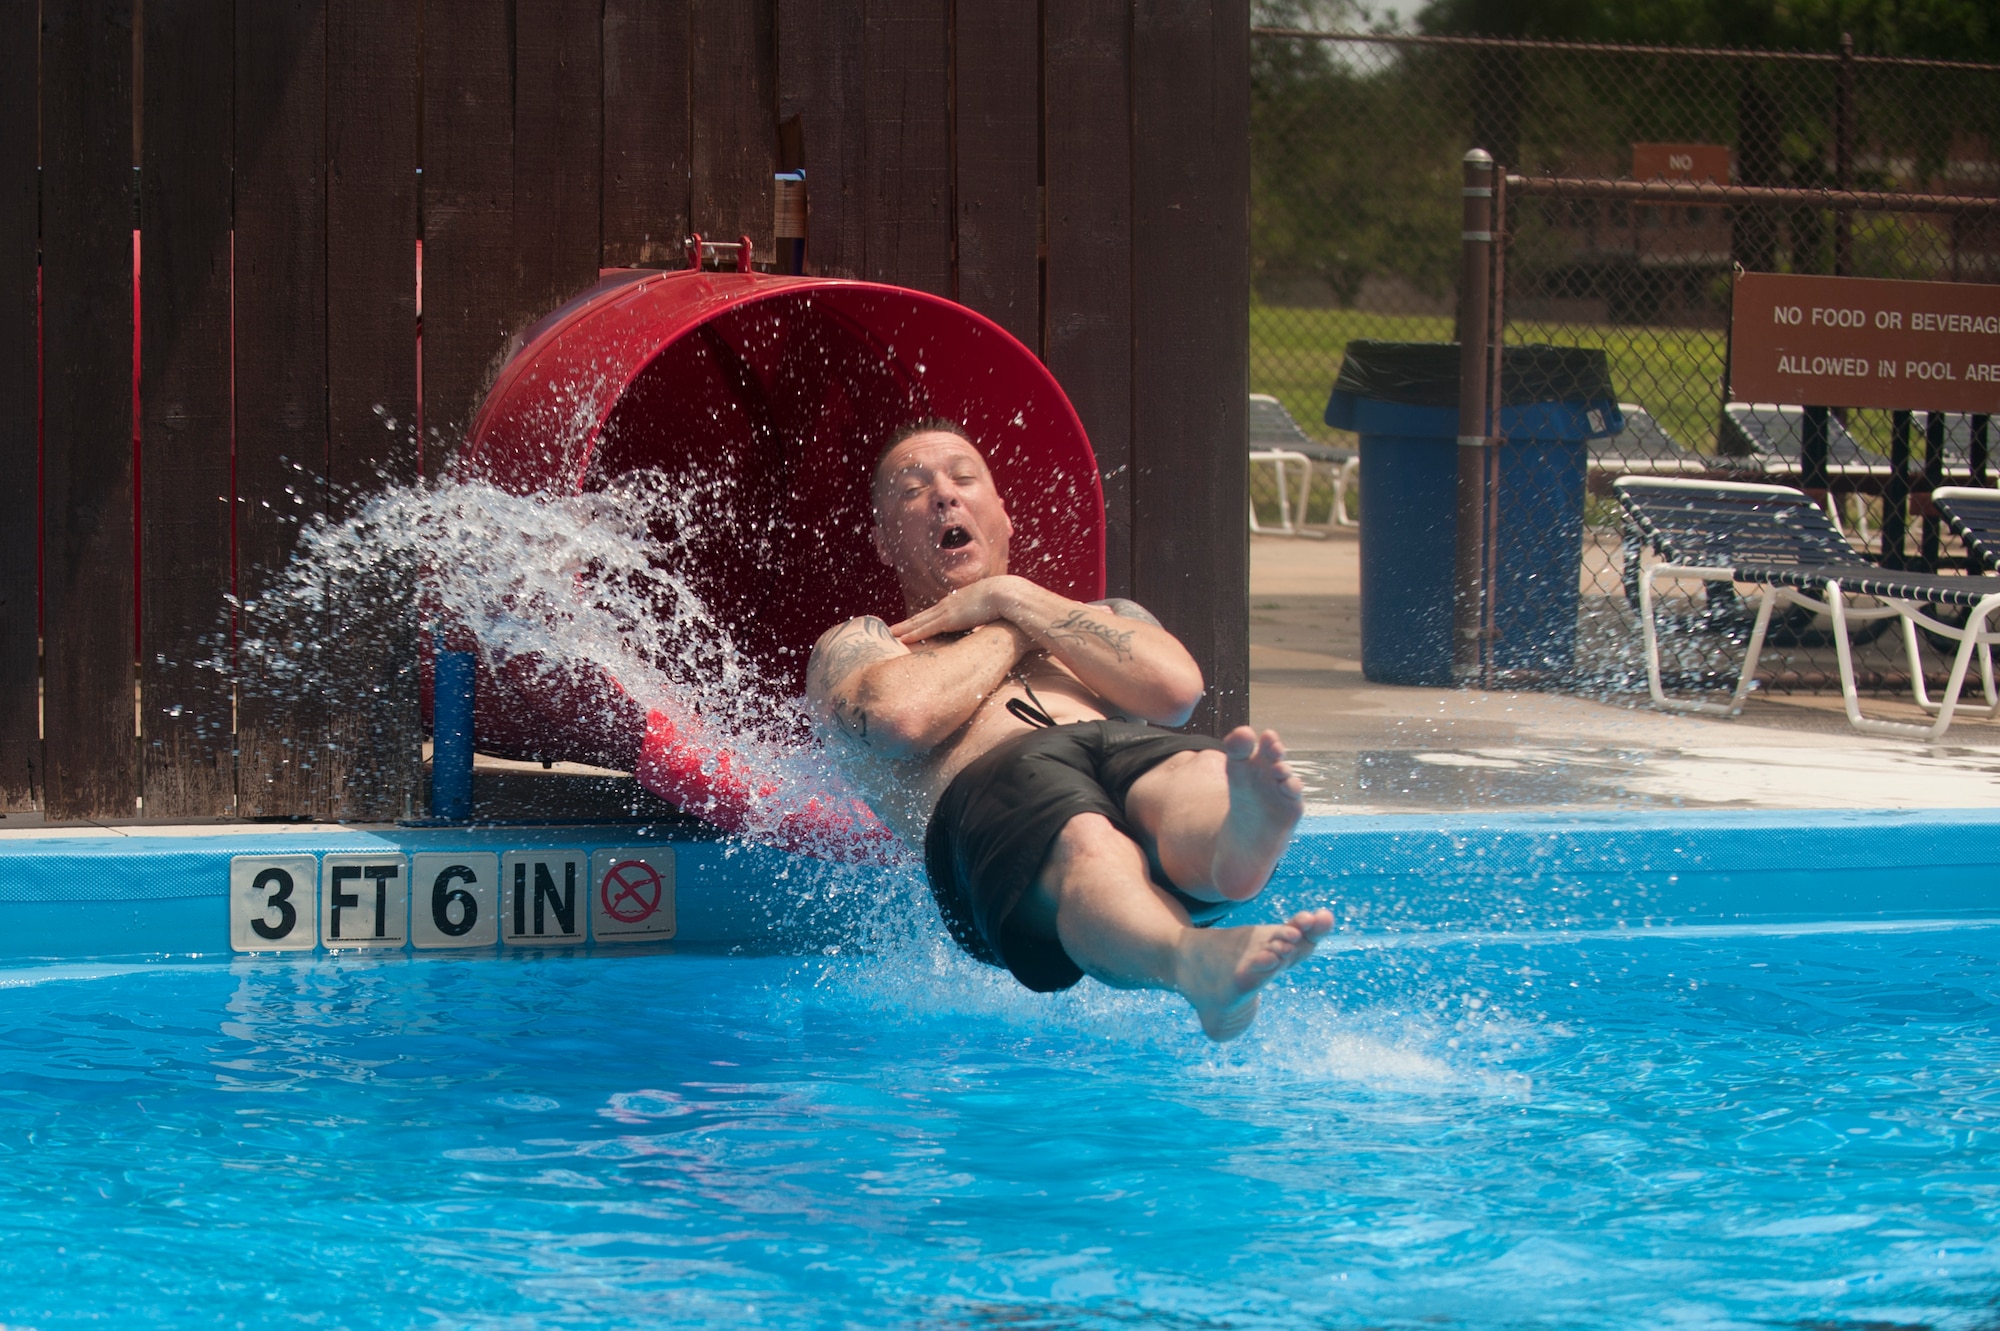 Chief Master Sgt. Donnie Bolton, 19th Security Forces Squadron manager, slides down the water slide at the base pool June 6, 2015, at Little Rock Air Force Base, Ark. The base pool is open Tuesday through Sunday from noon – 7 p.m. (U.S. Air Force photo by Senior Airman Scott Poe) 